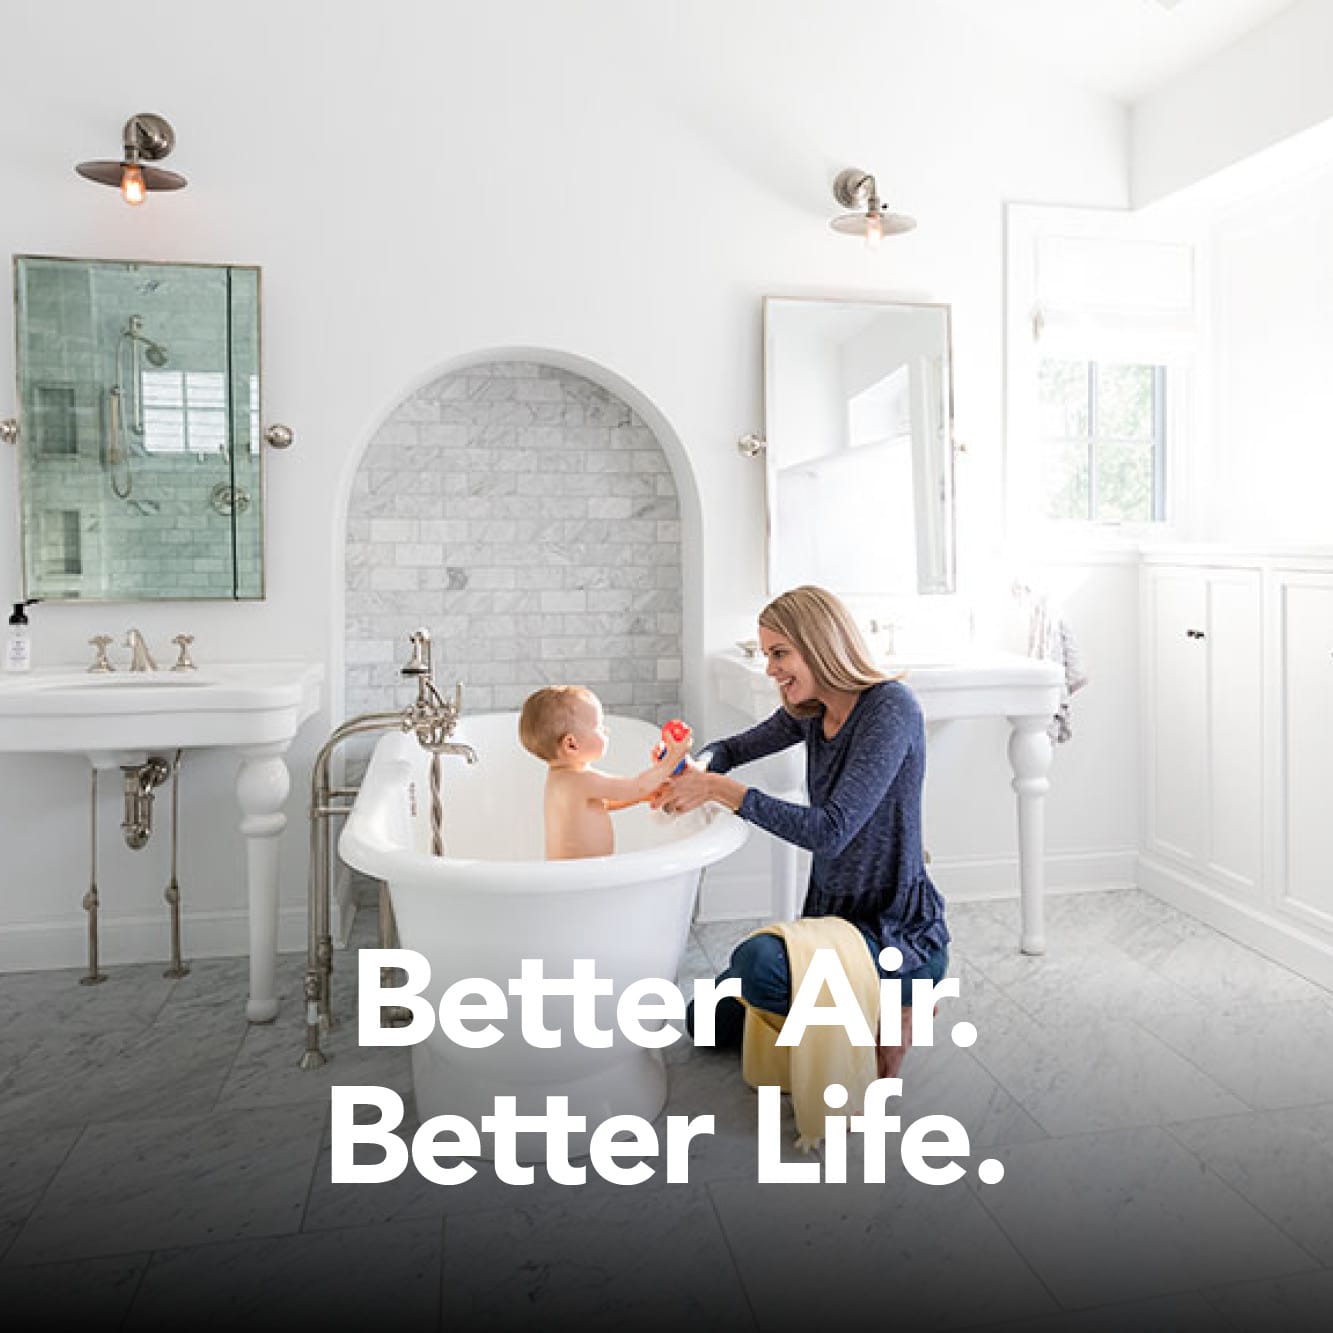 Family enjoying bathtime while breathing quality indoor air.